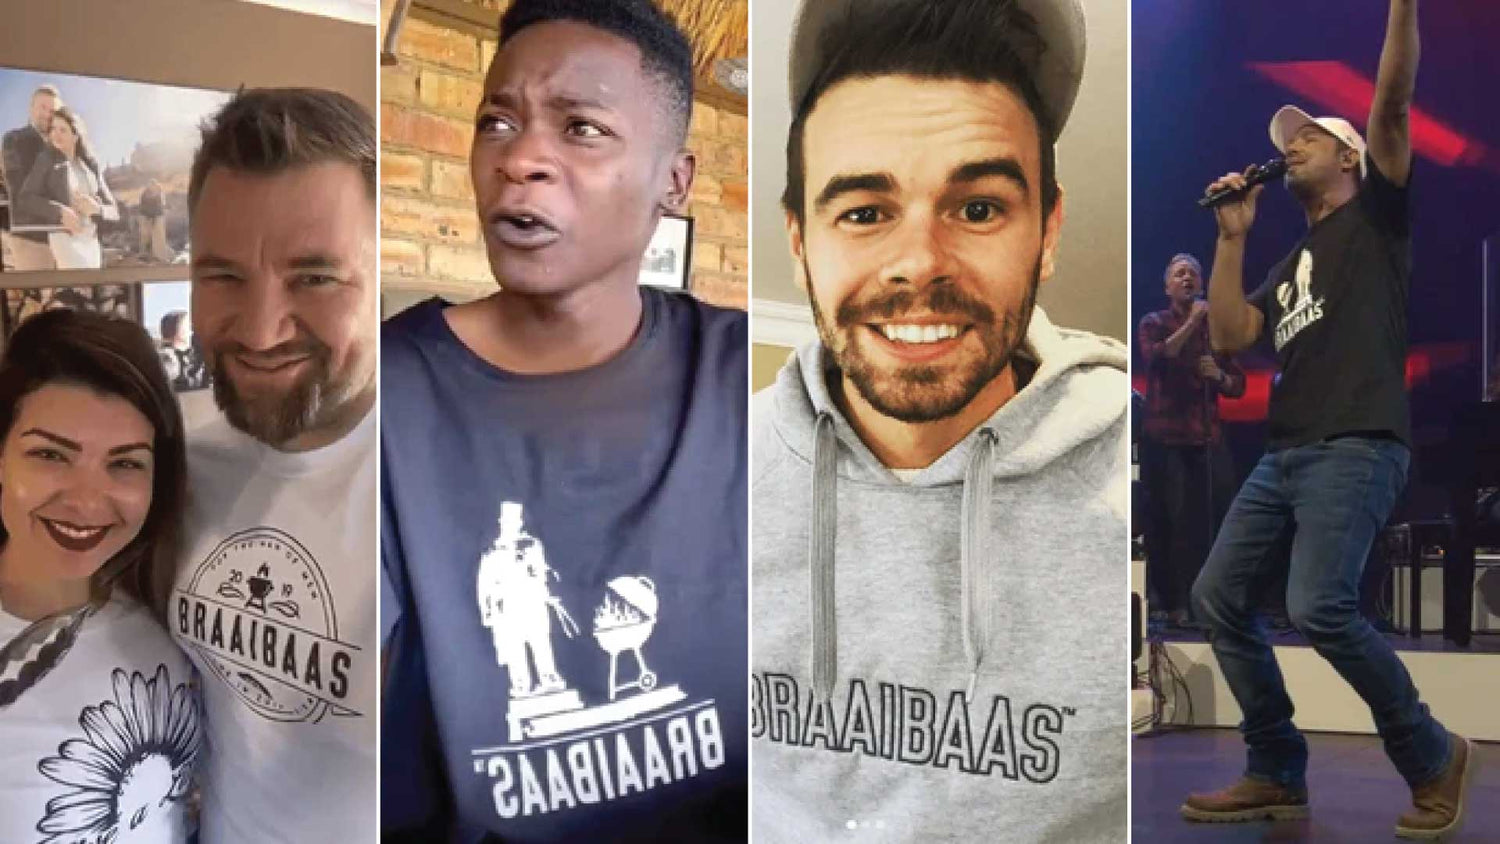 Famous artists and influencers who wear BraaiBaas